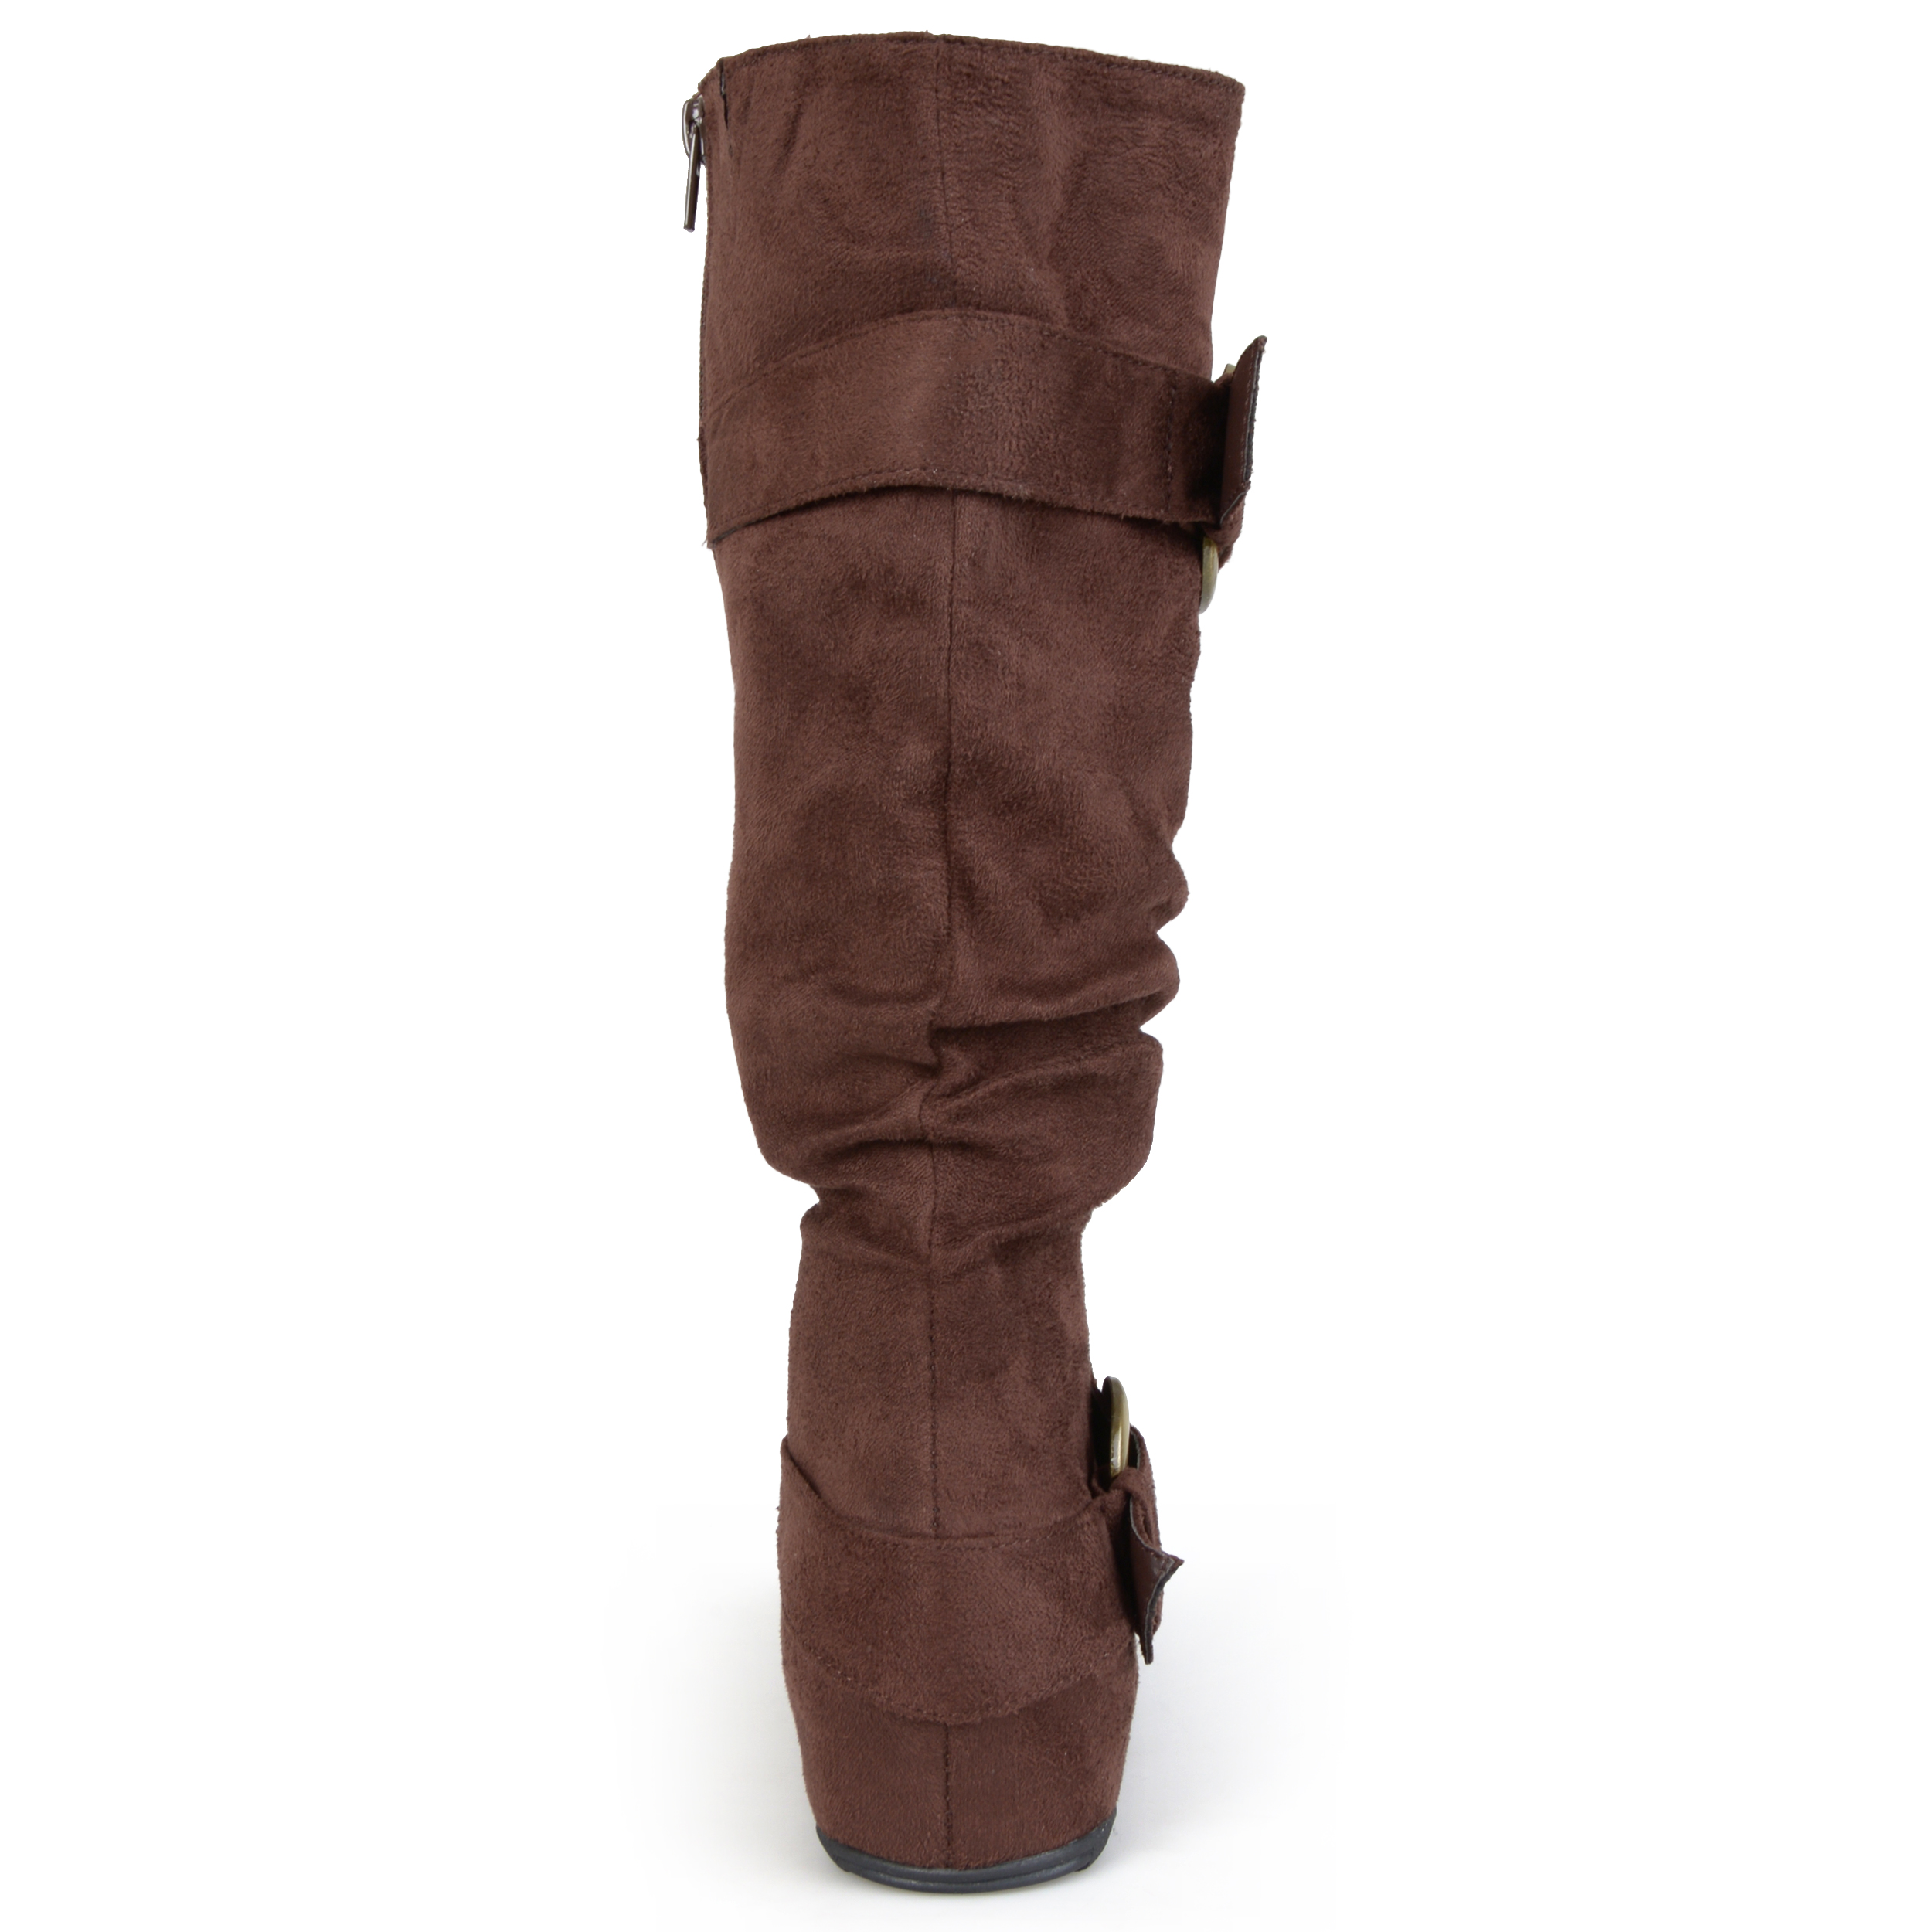 Brinley Co. Womens Wide Calf Dress Boot - image 4 of 8